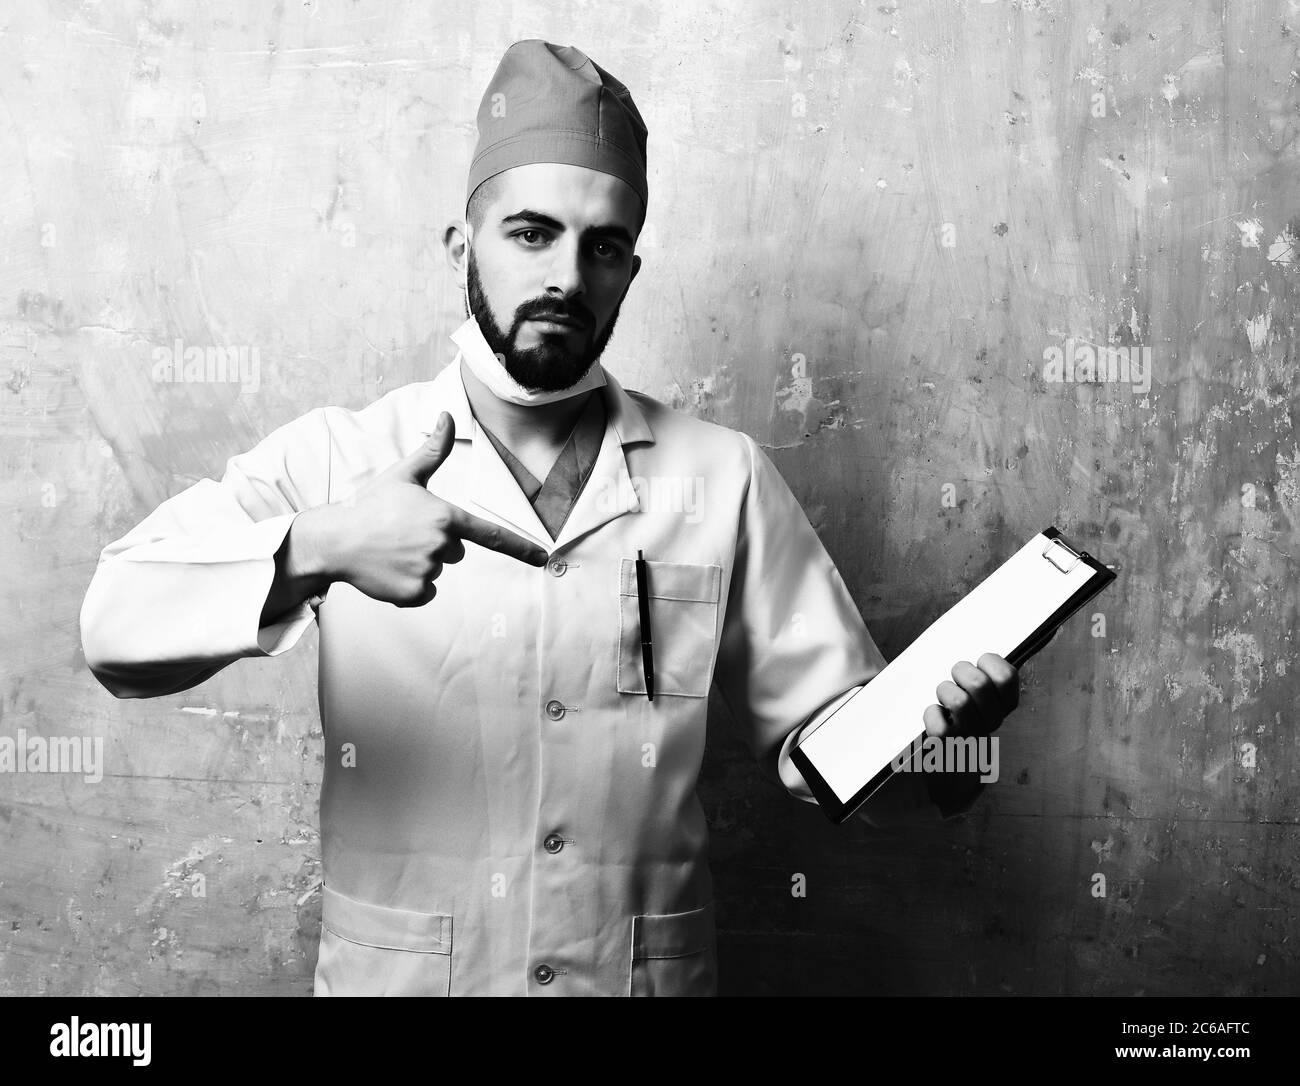 Doctor in uniform with beard and serious face expression pointing at clip folder on background of beige color wall Stock Photo